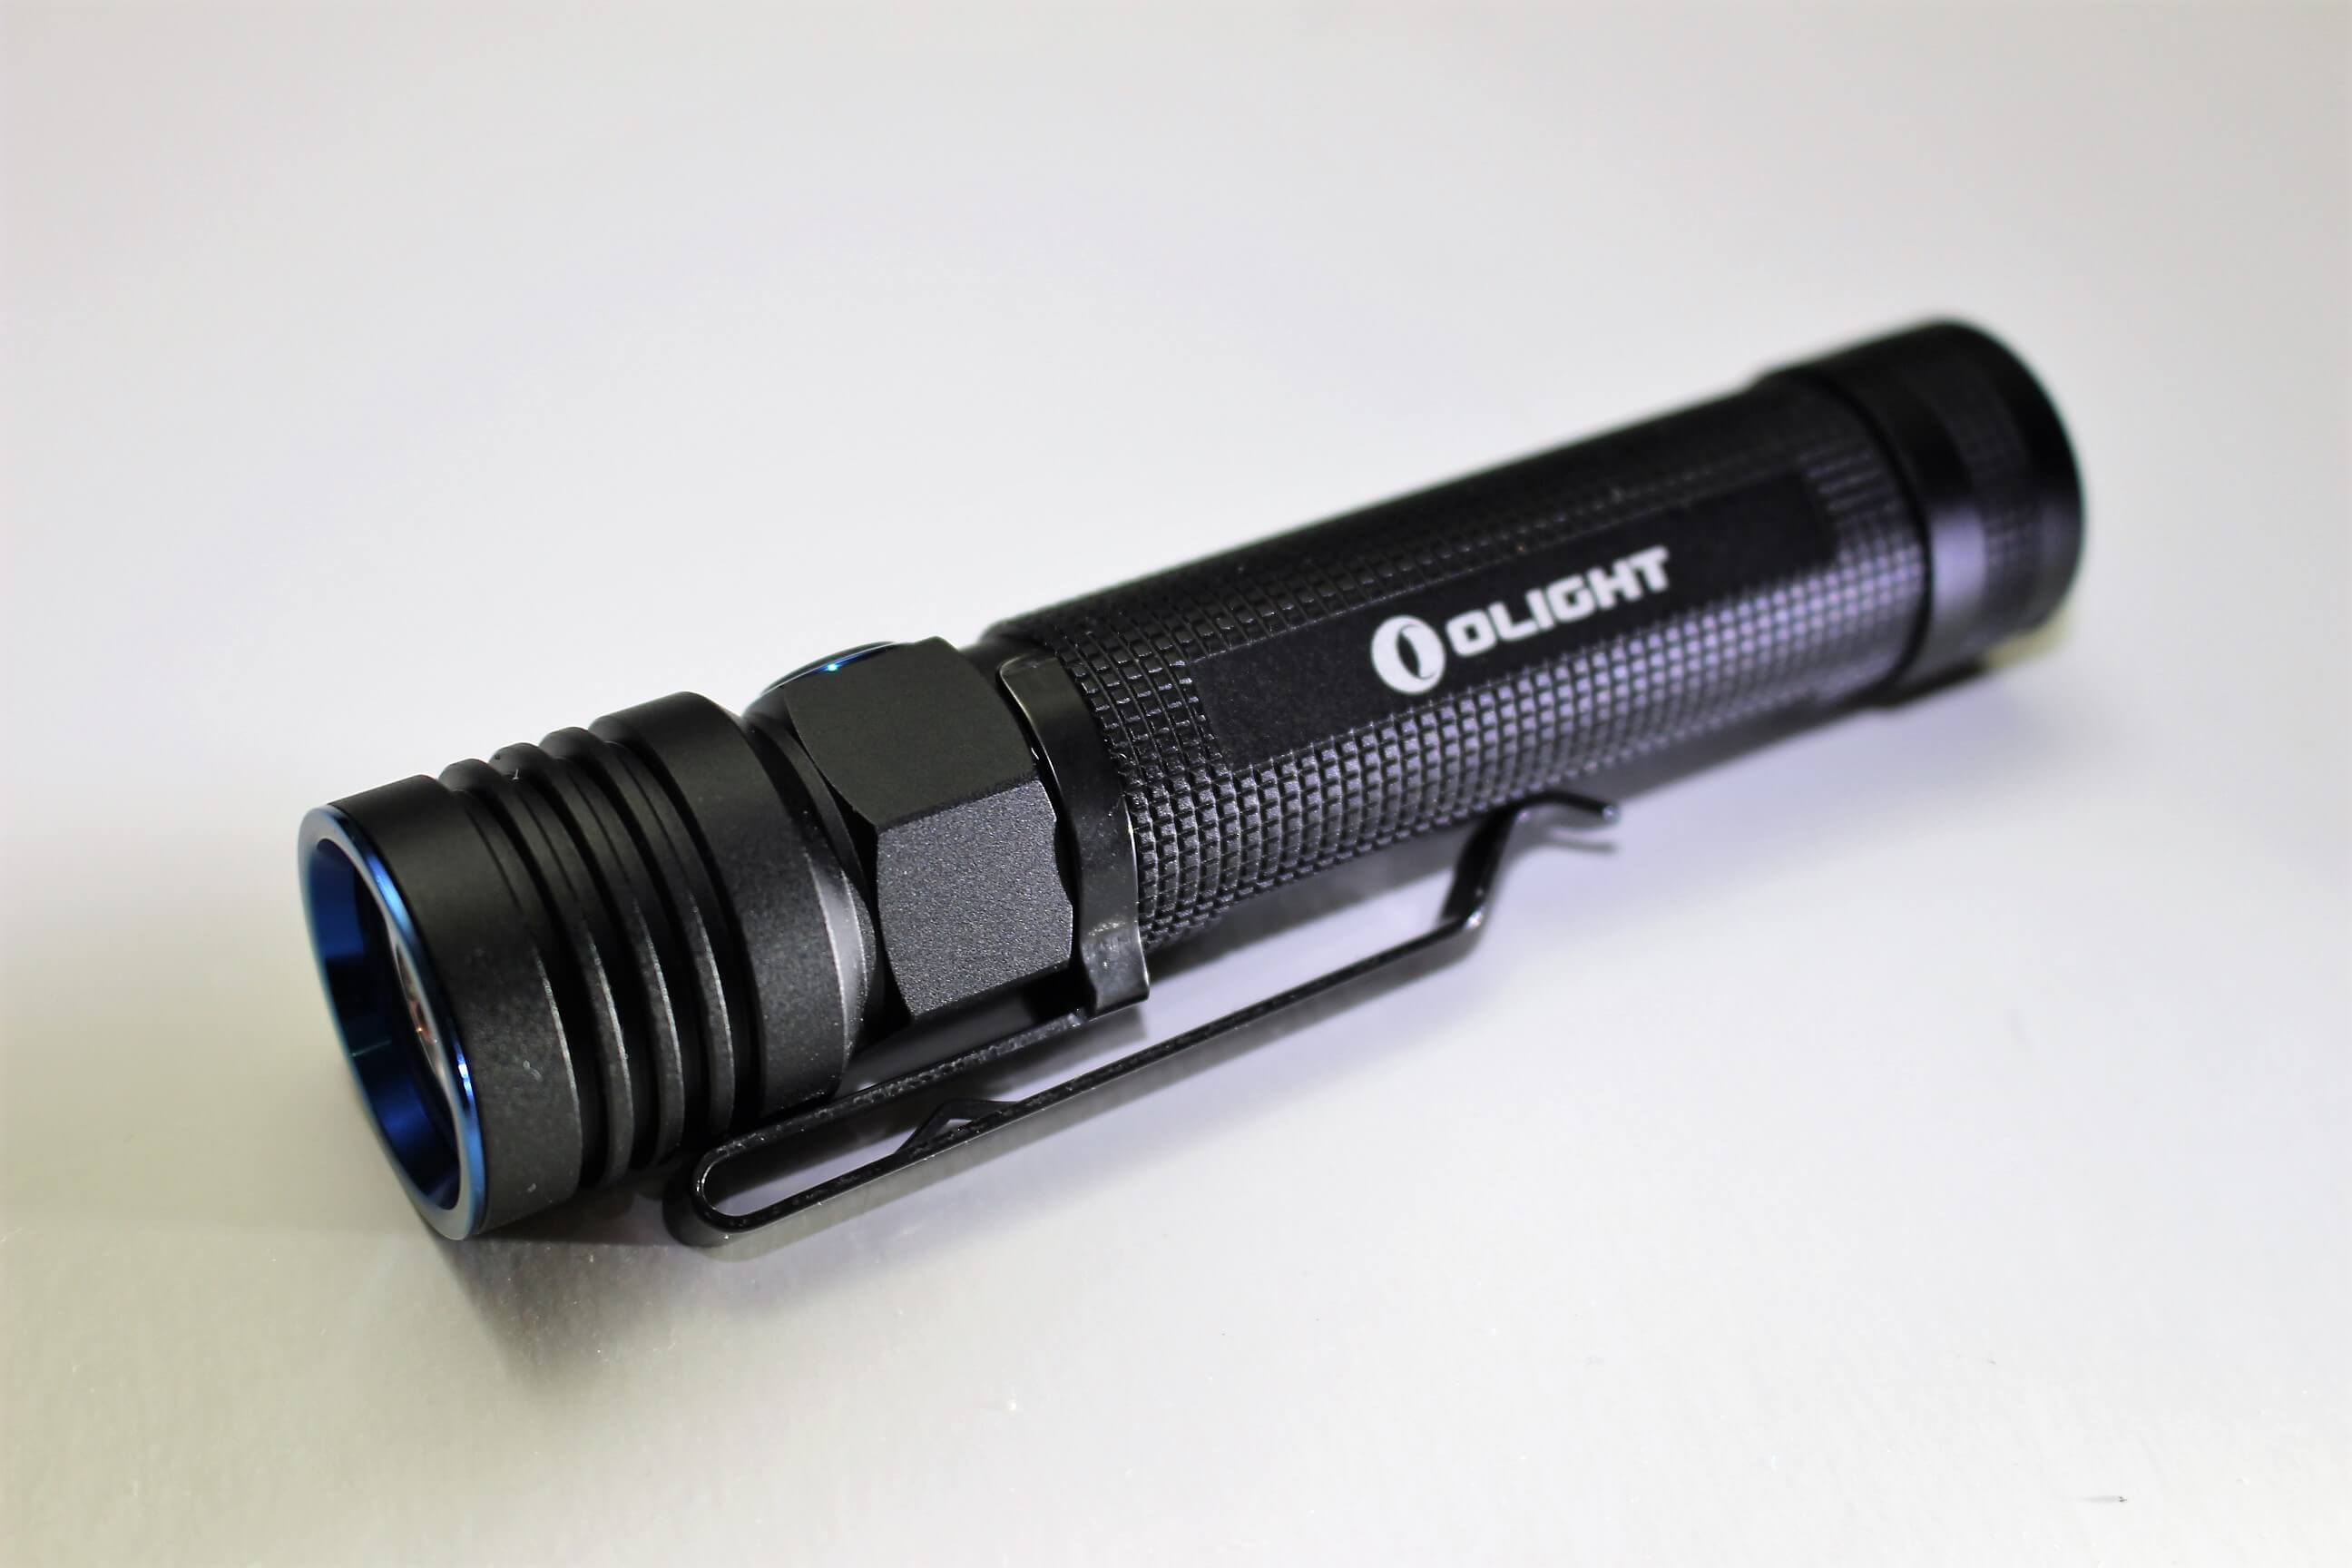 Olight S30R Baton III Flashlight CREE XM-L2 LED 1050 Lumens Variable-Output USB Rechargeable Torch Side-Switch LED Torches with 18650 Battery and BanTac Battery Case